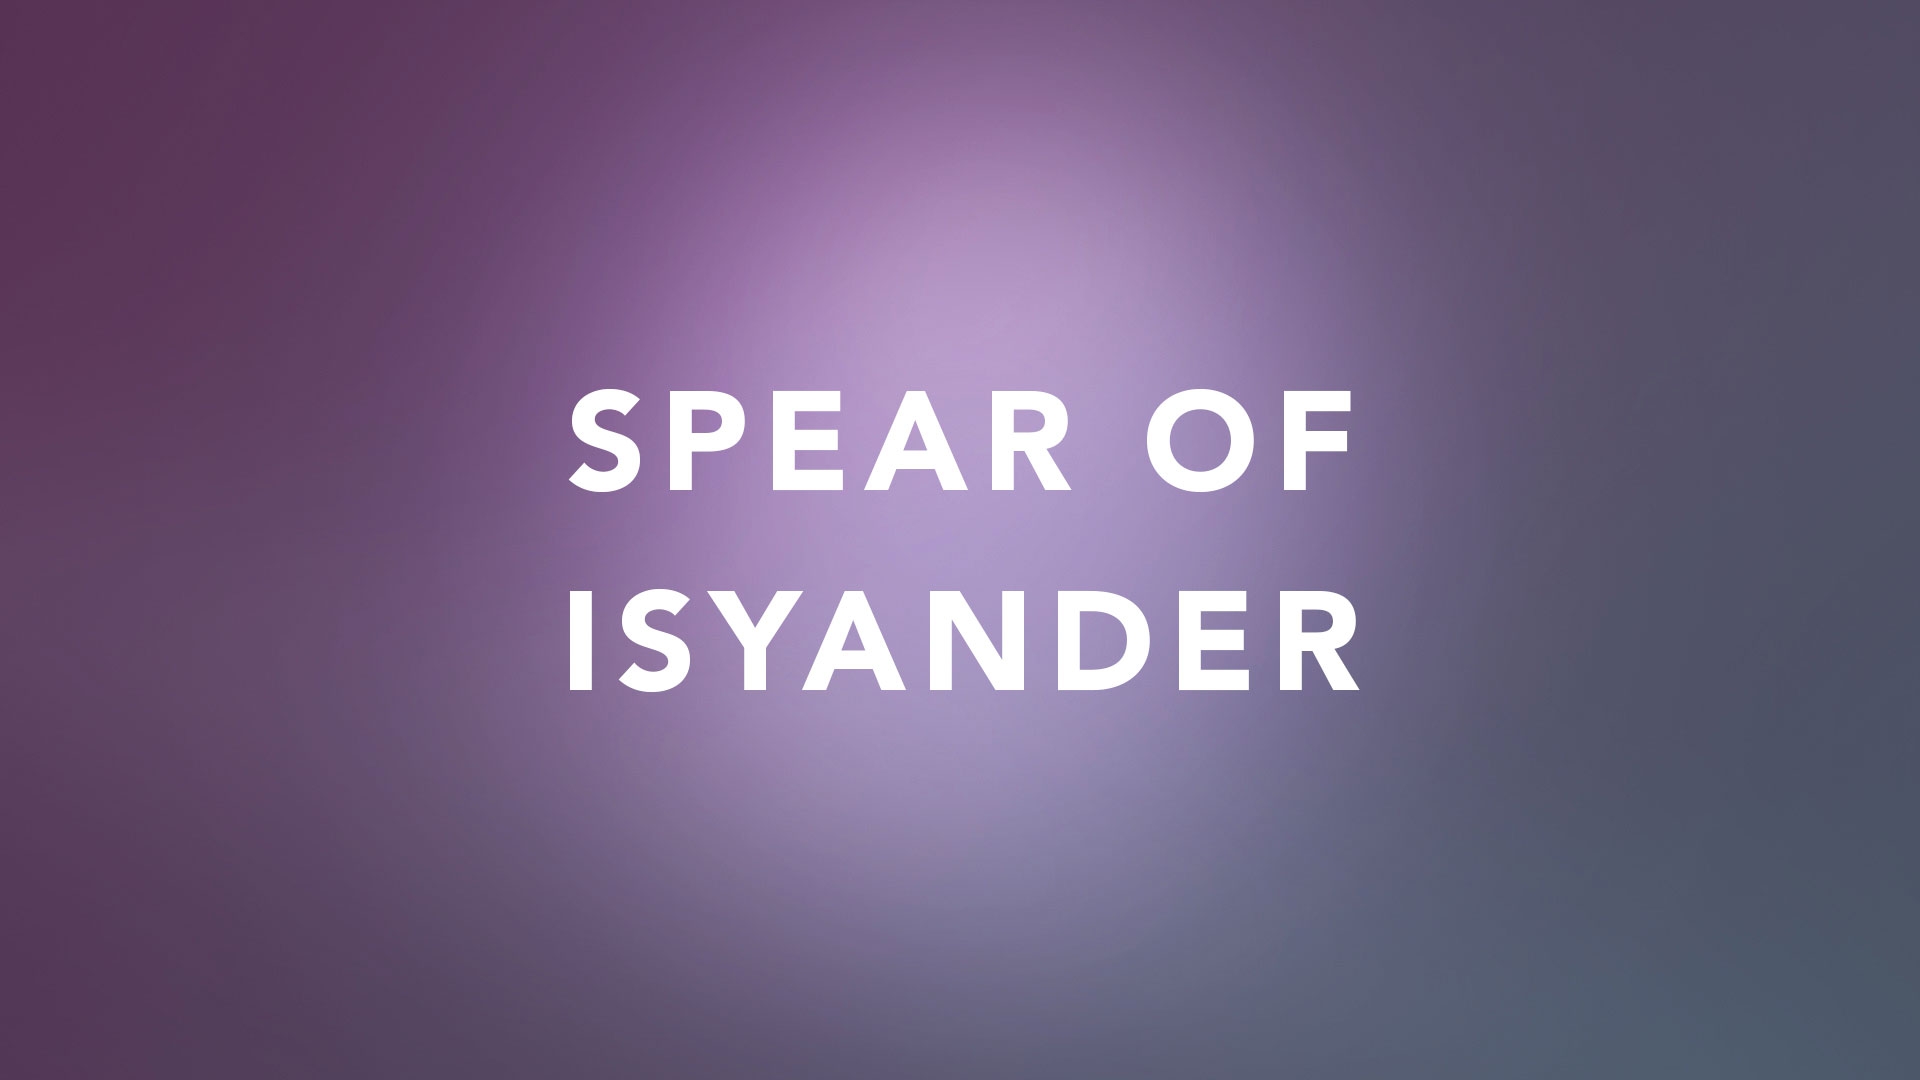 Spear of Isyander